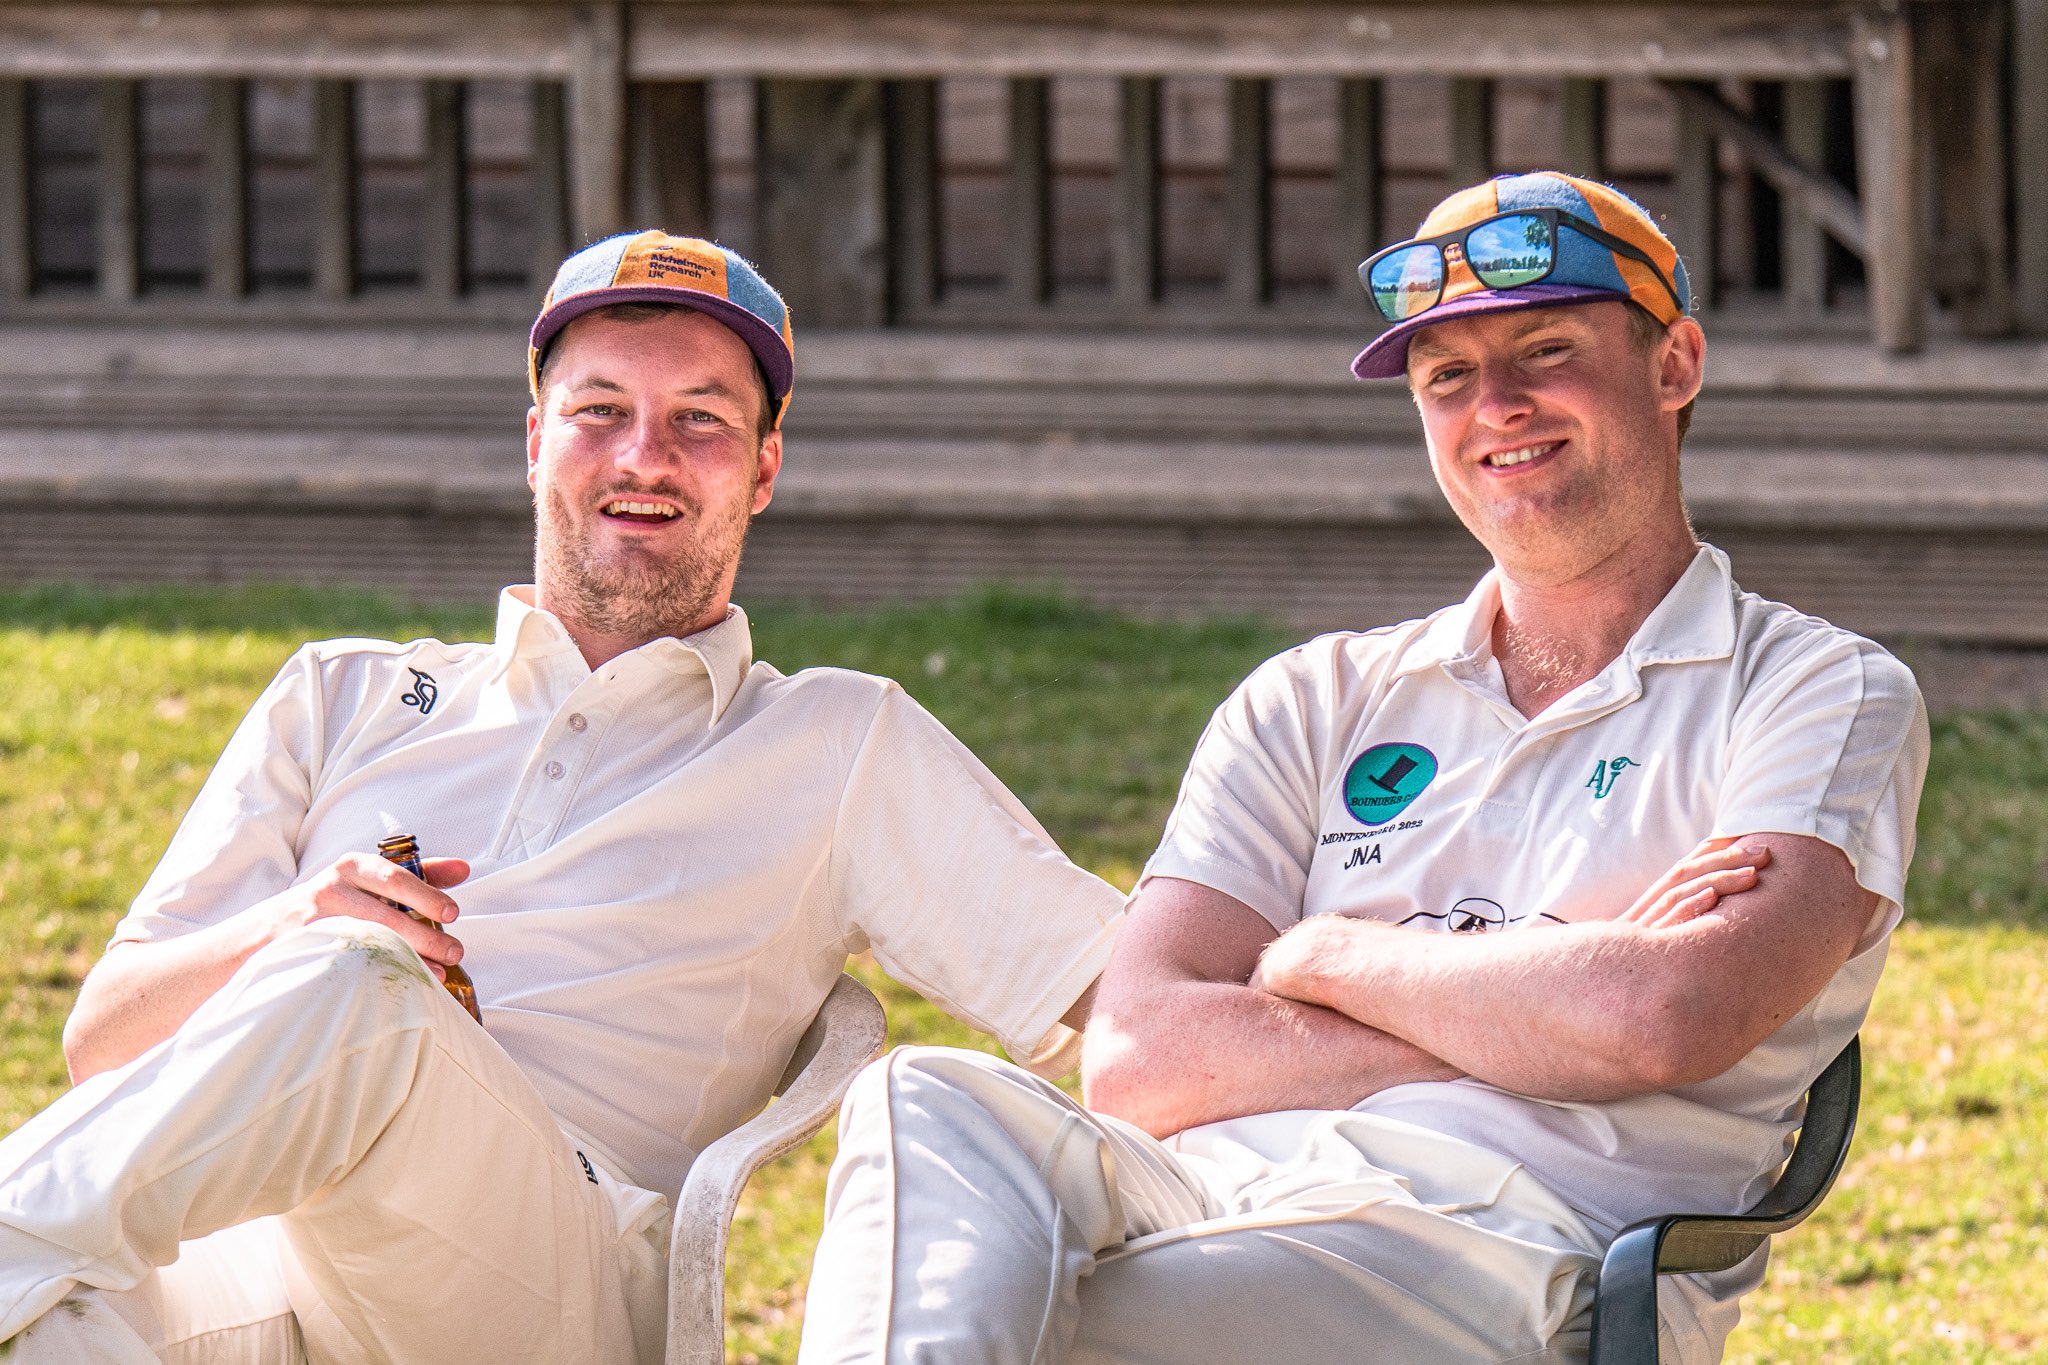 Charity Cricket Day raises almost £9,000